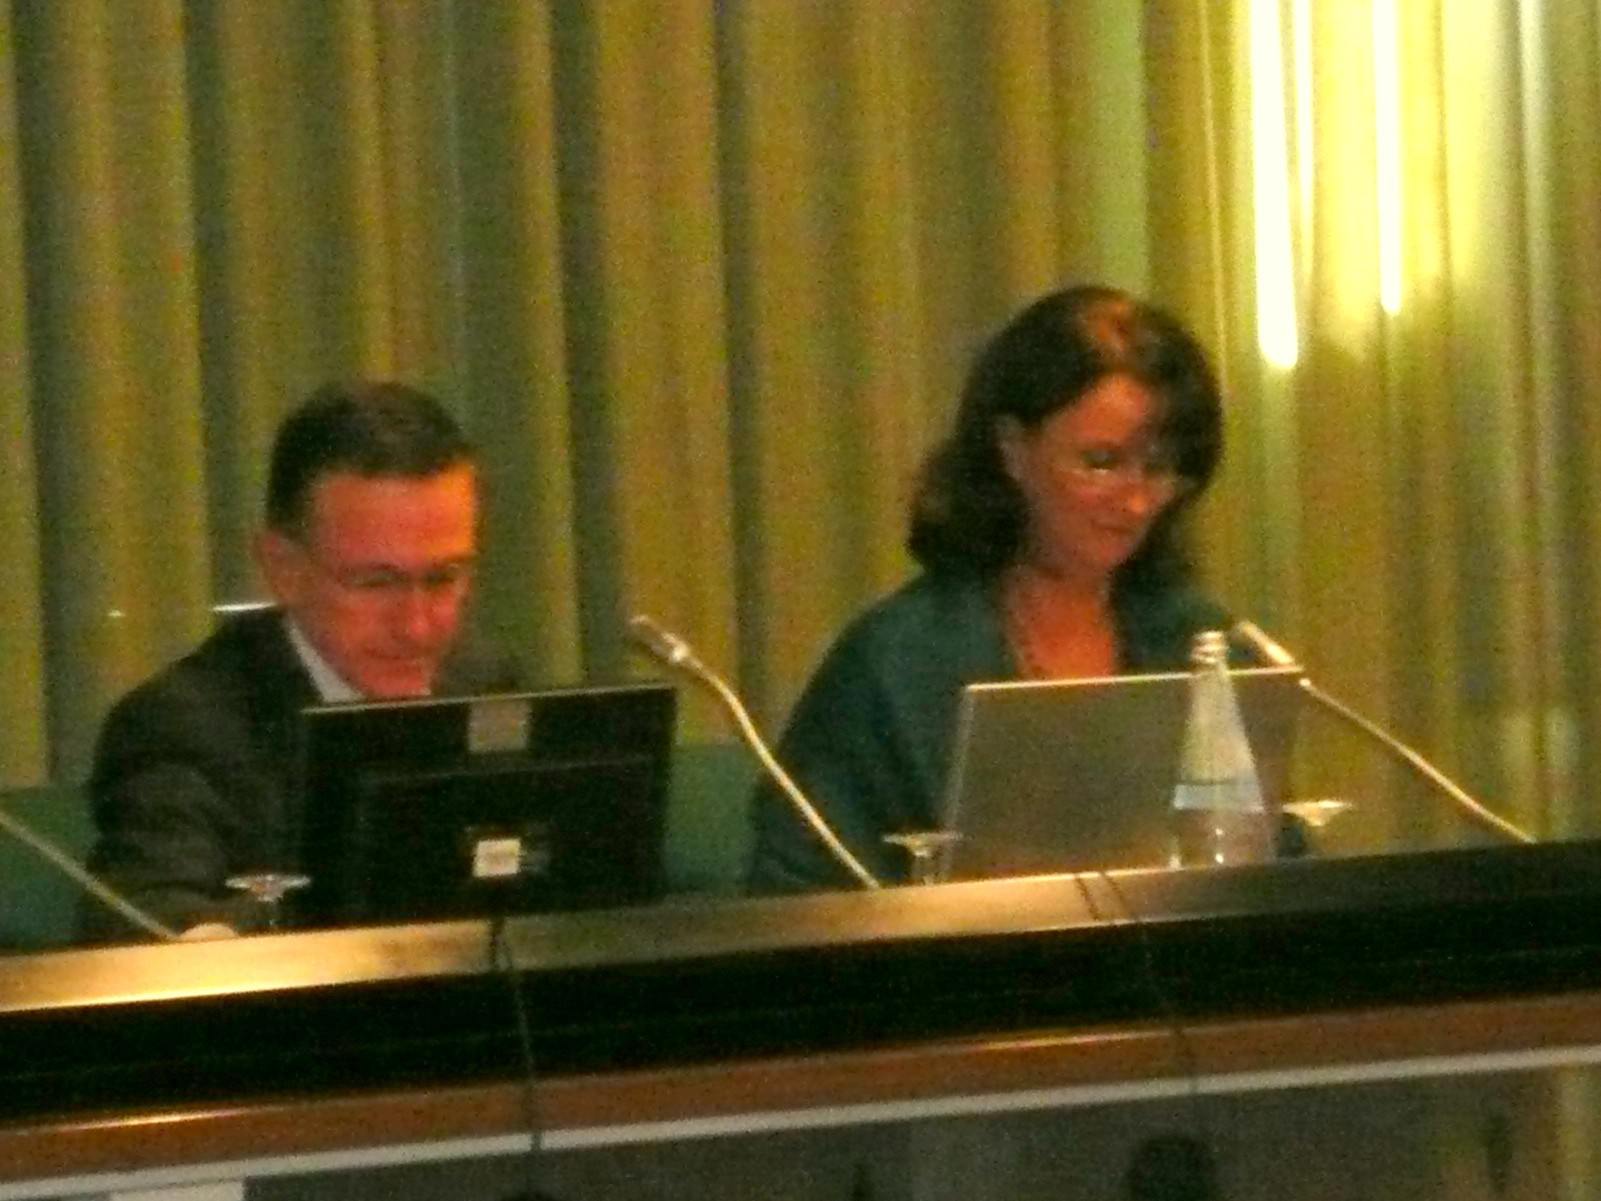 Presentation of AFLF and of the EuropeanSan Benedict project 2010